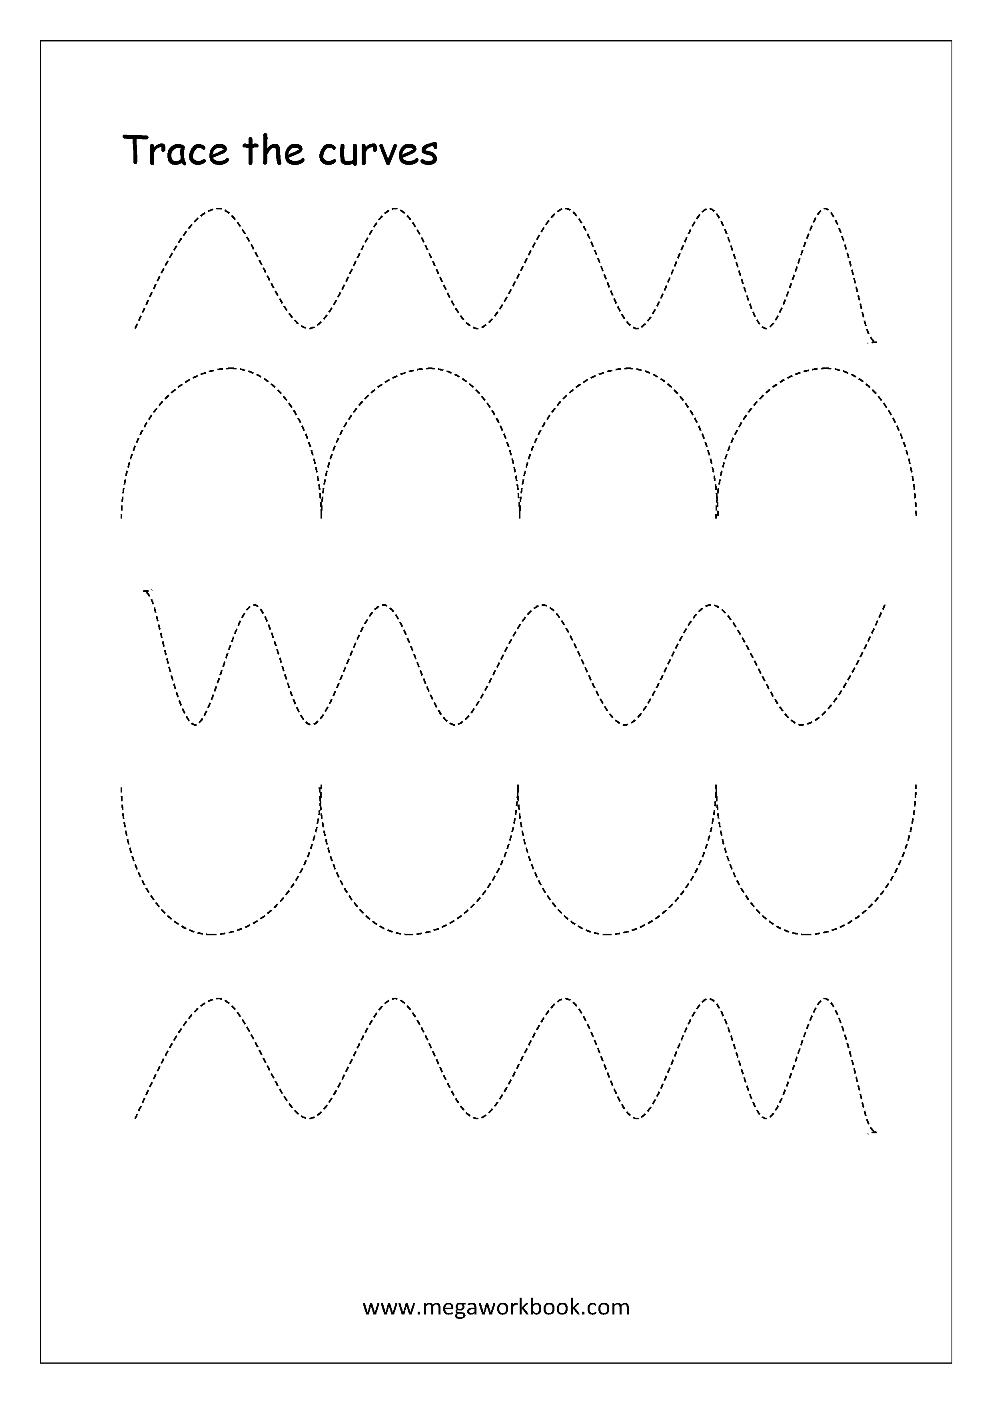 Free Printable Pre-Writing Tracing Worksheets For Preschoolers - Free Printable Preschool Worksheets Tracing Lines